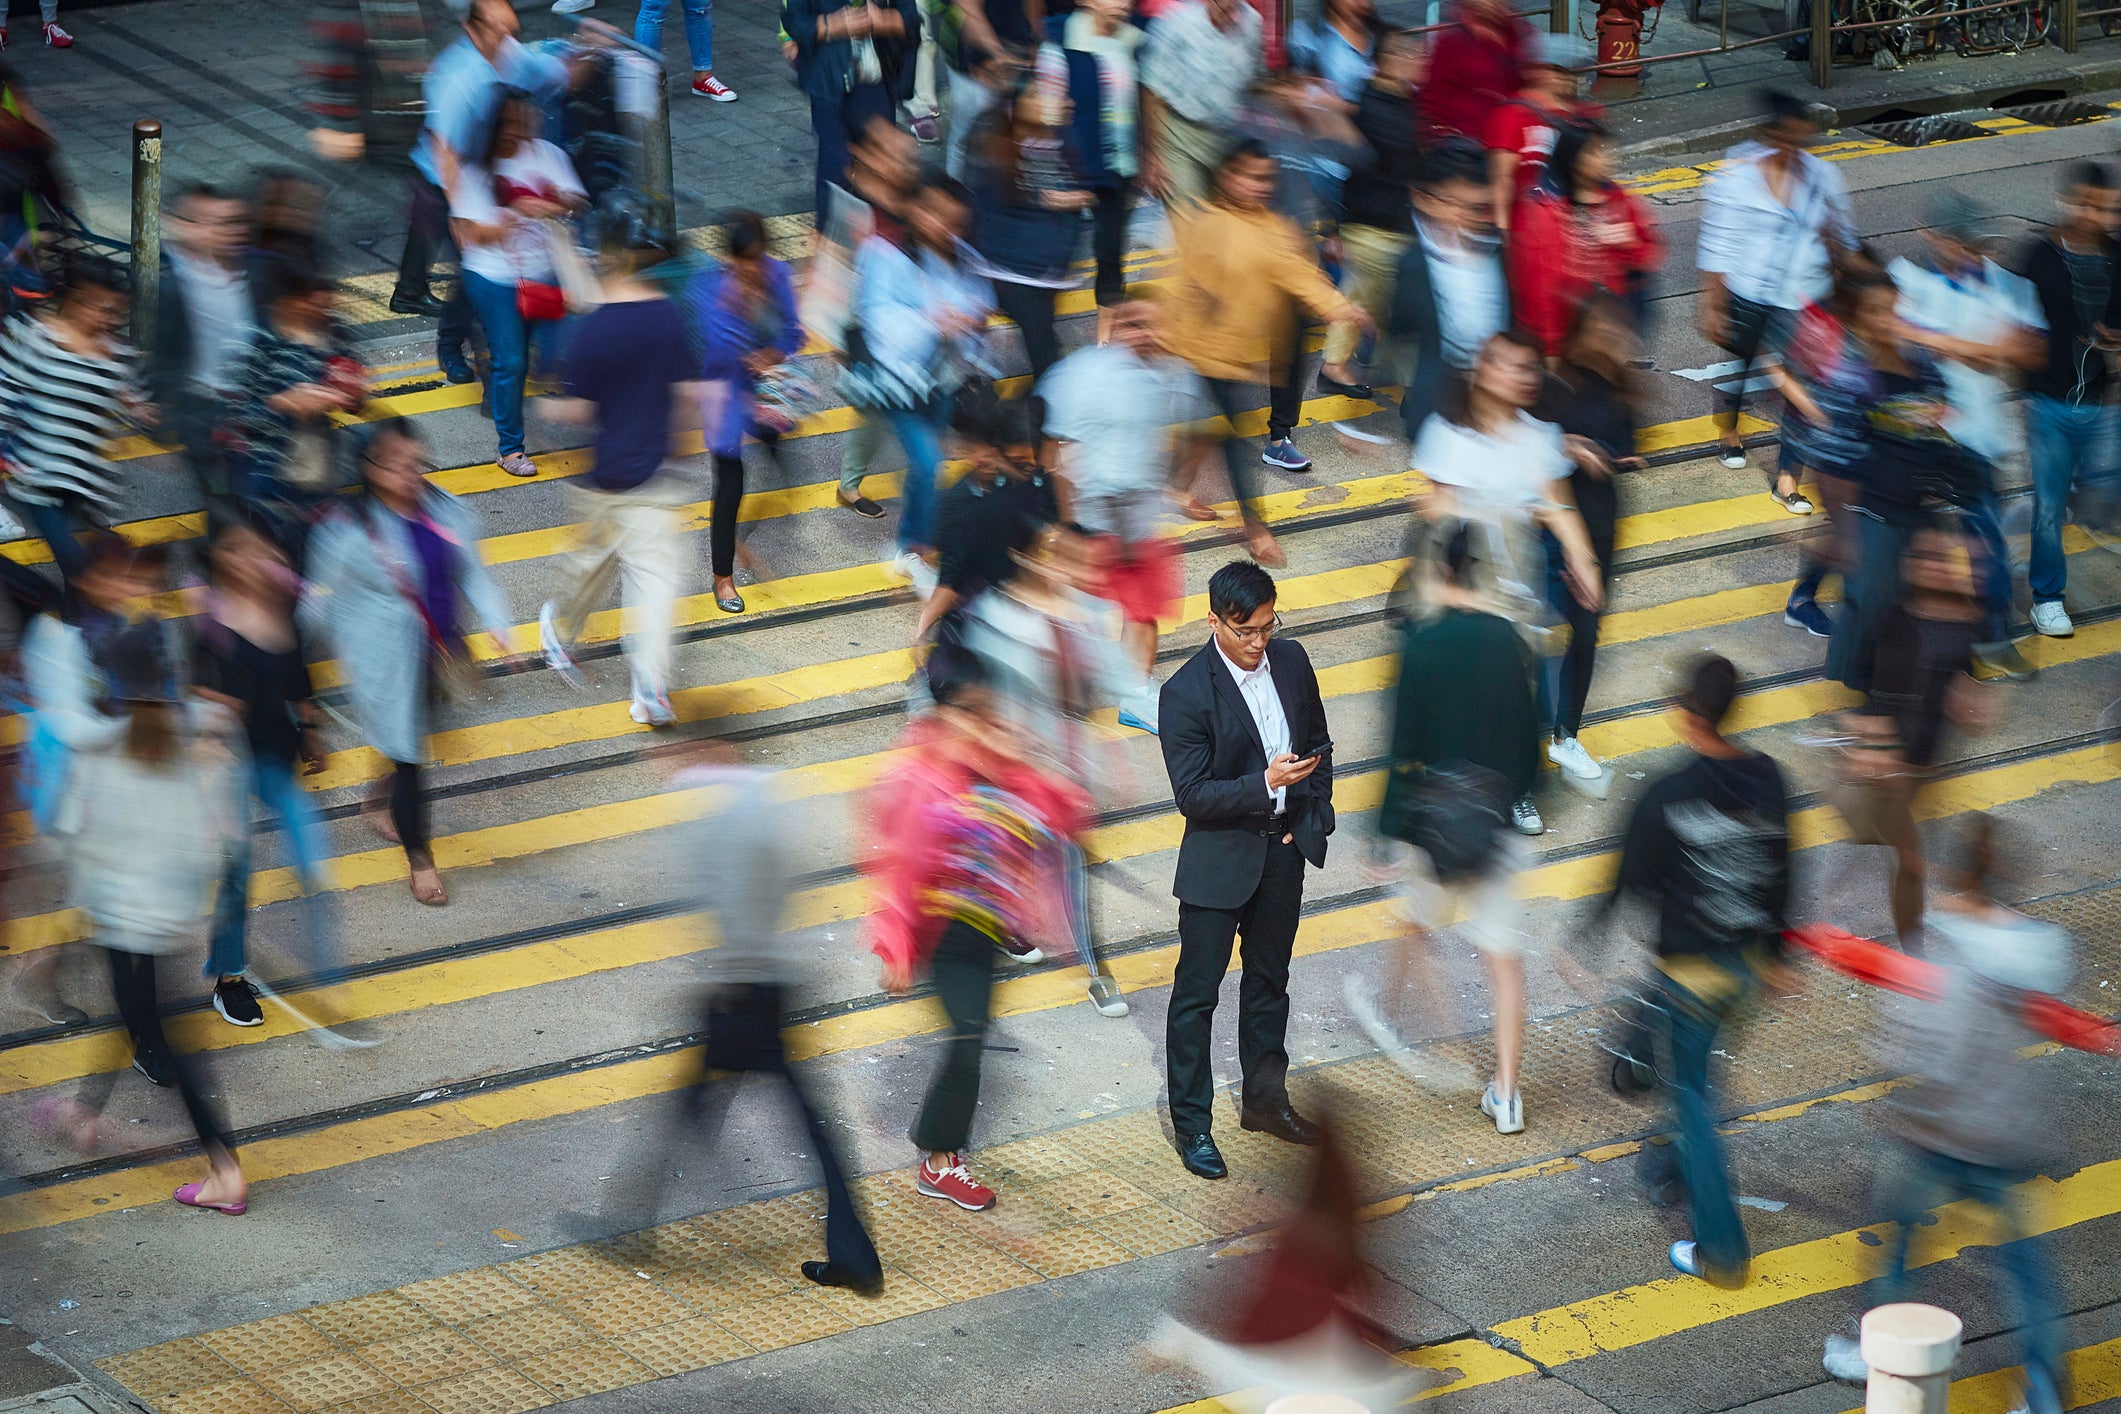 Humans organise themselves in ‘lane formation’ – unless people start using their phones